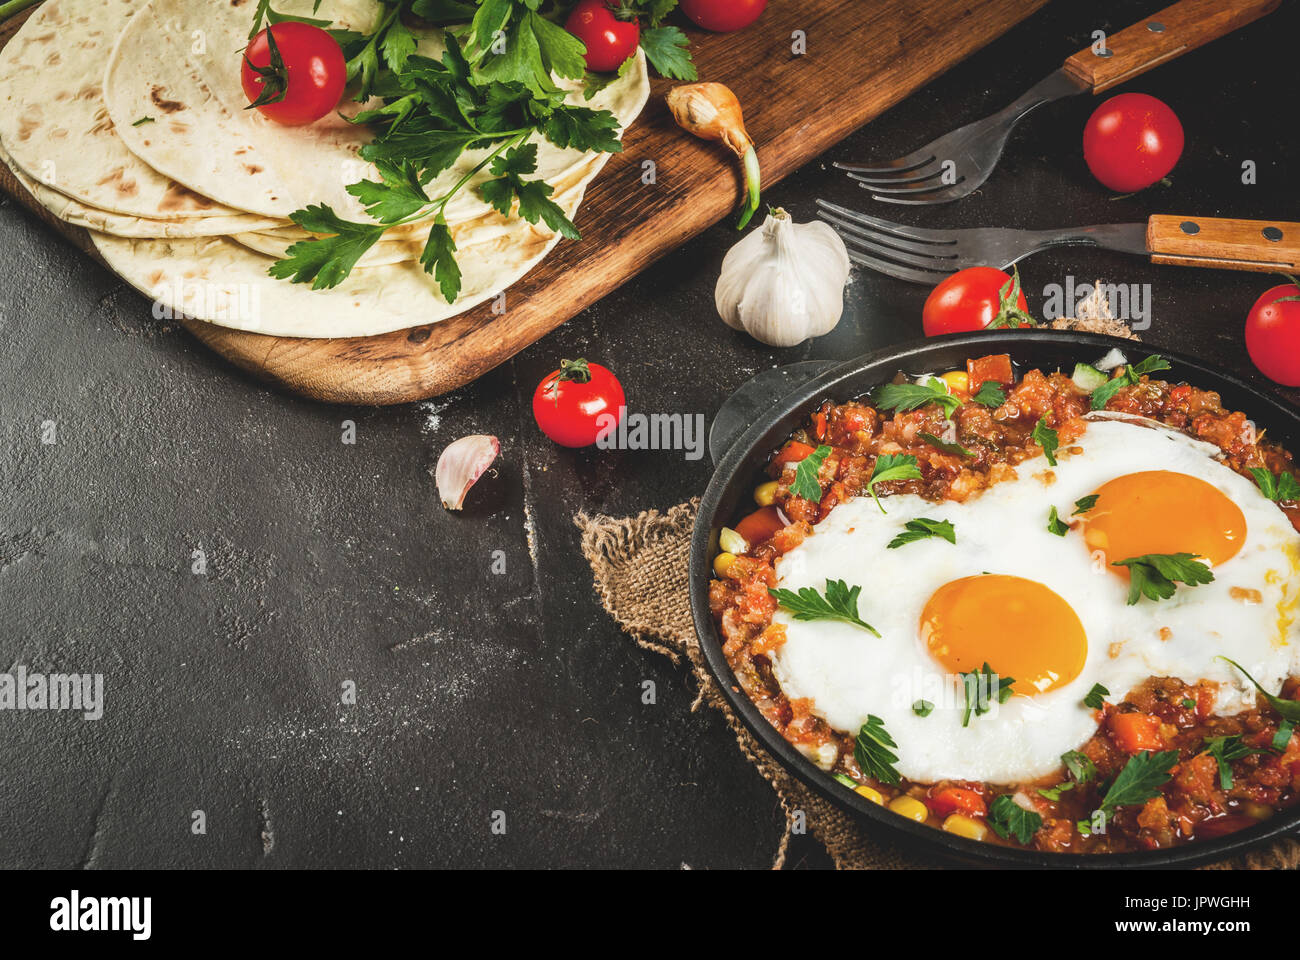 Traditional Mexican dish Huevos rancheros - scrambled eggs with tomato salsa, with taco tortillas, fresh vegetables and parsley. Breakfast for two. On Stock Photo